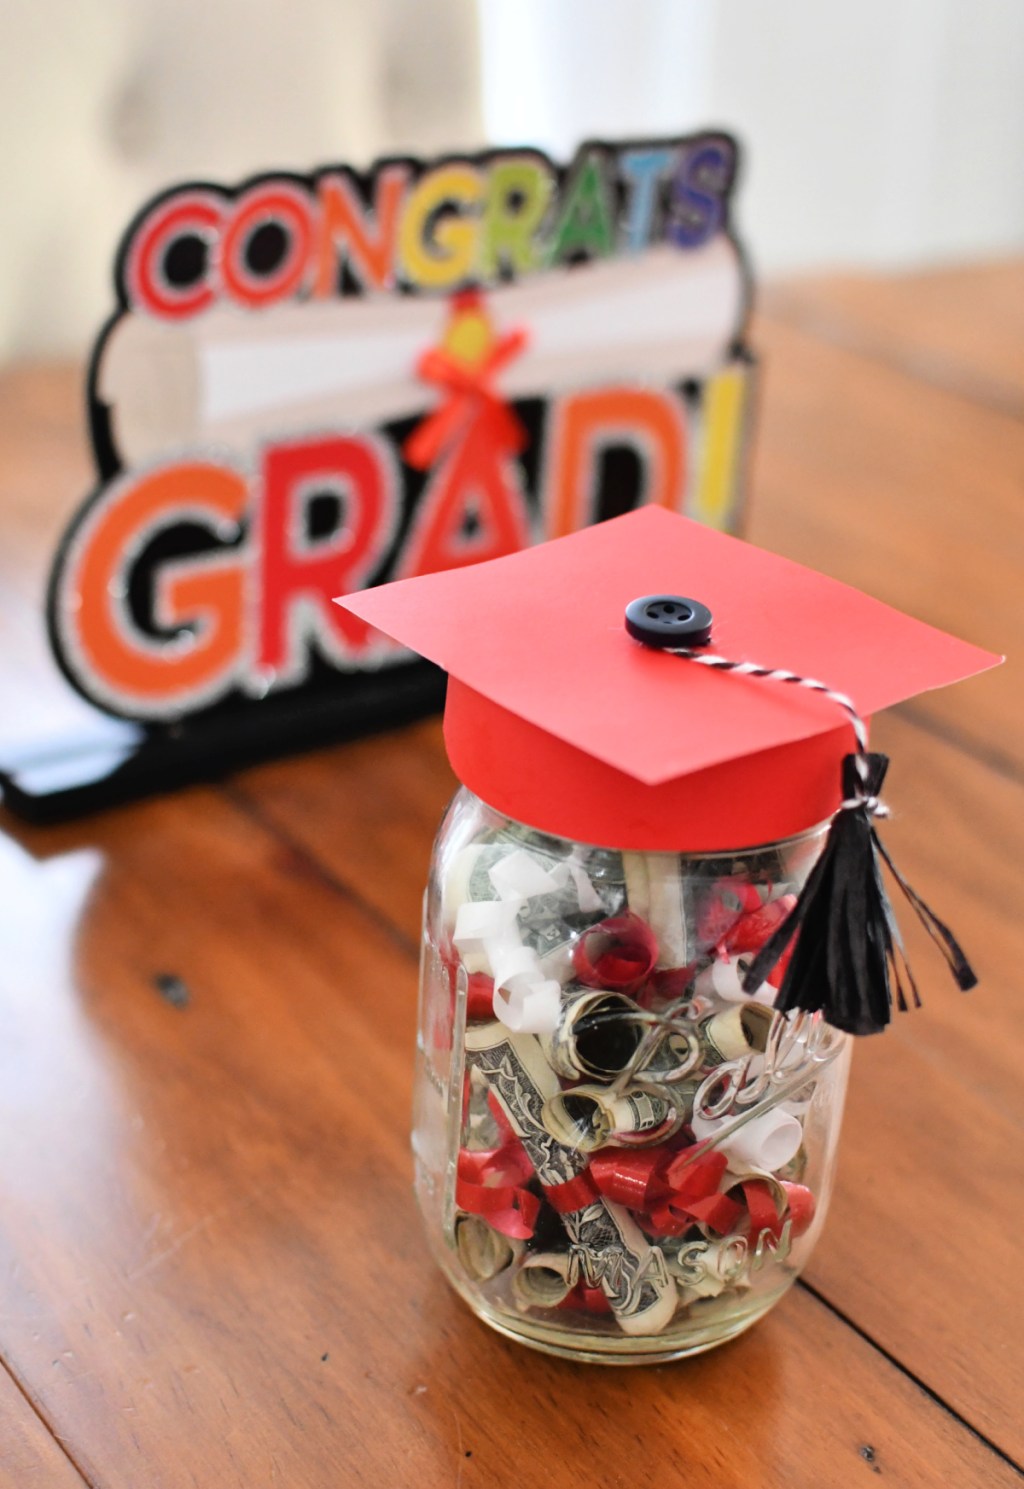 congrats grad sign and jar gift on a table